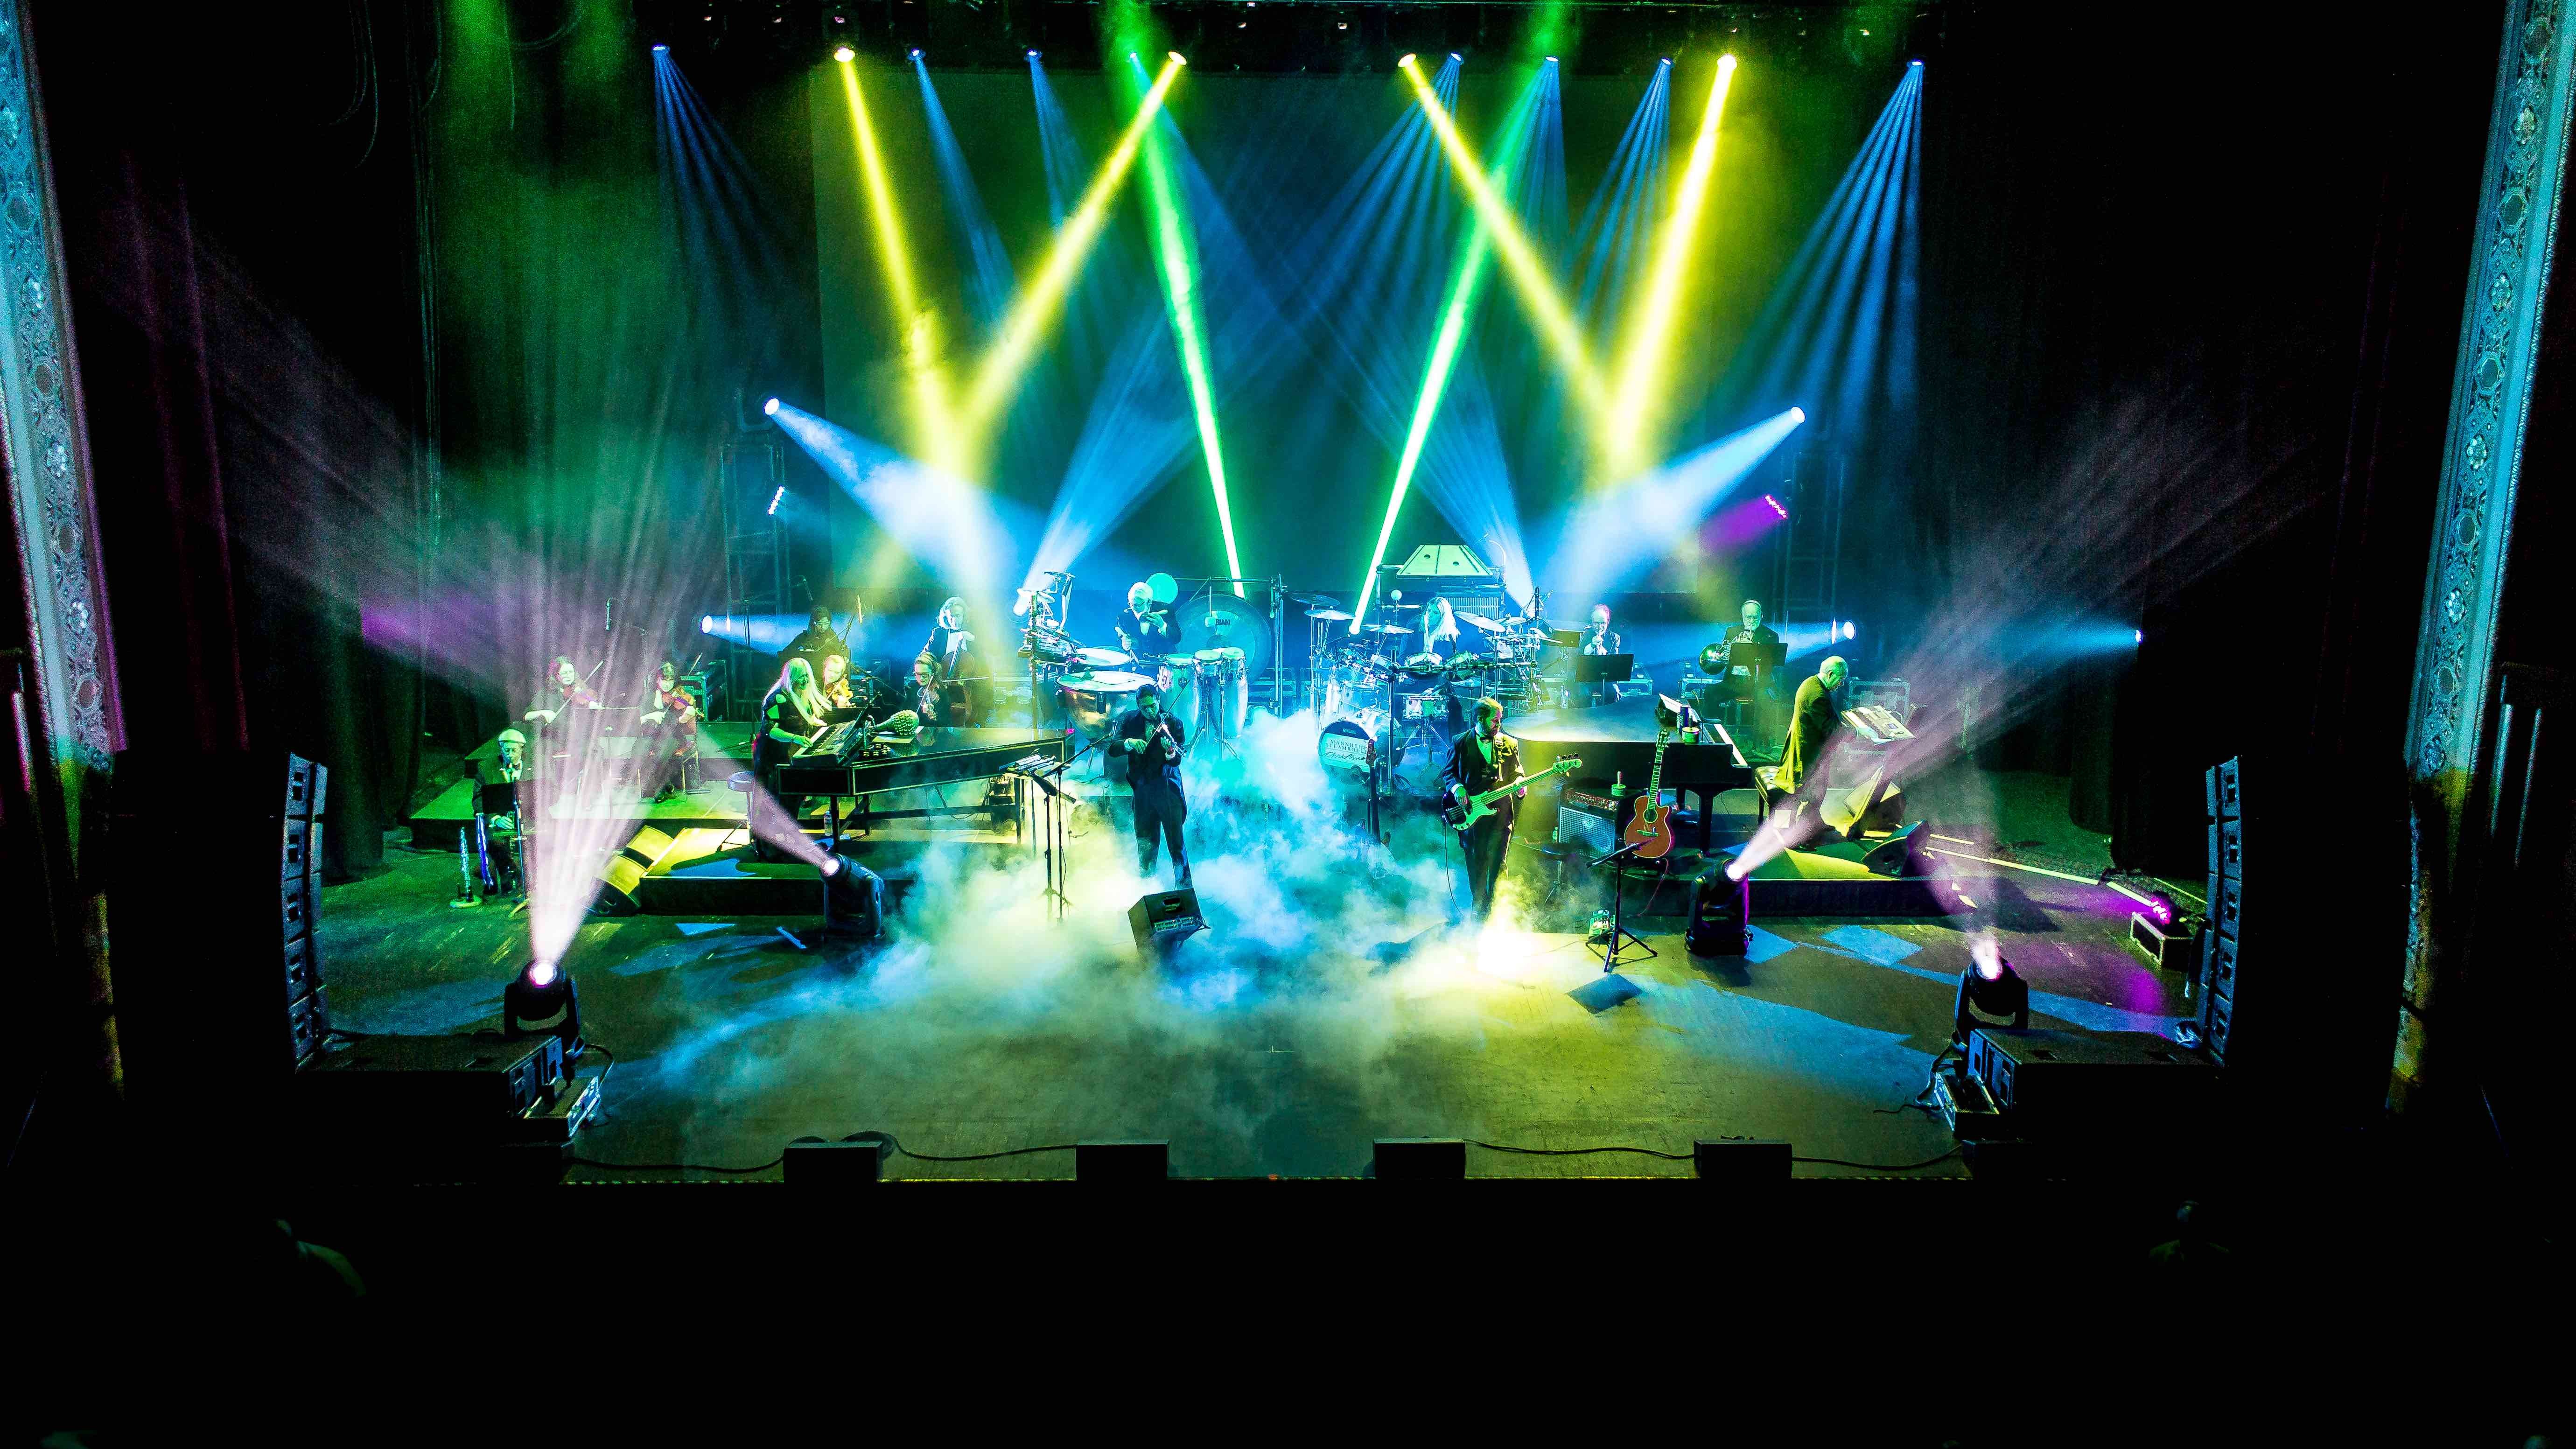 Mannheim Steamroller 2022 Schedule Mannheim Steamroller Will Give San Antonio An Extra Jolt Of Holiday Cheer  Dec. 28 At The Majestic | Things To Do | San Antonio | San Antonio Current